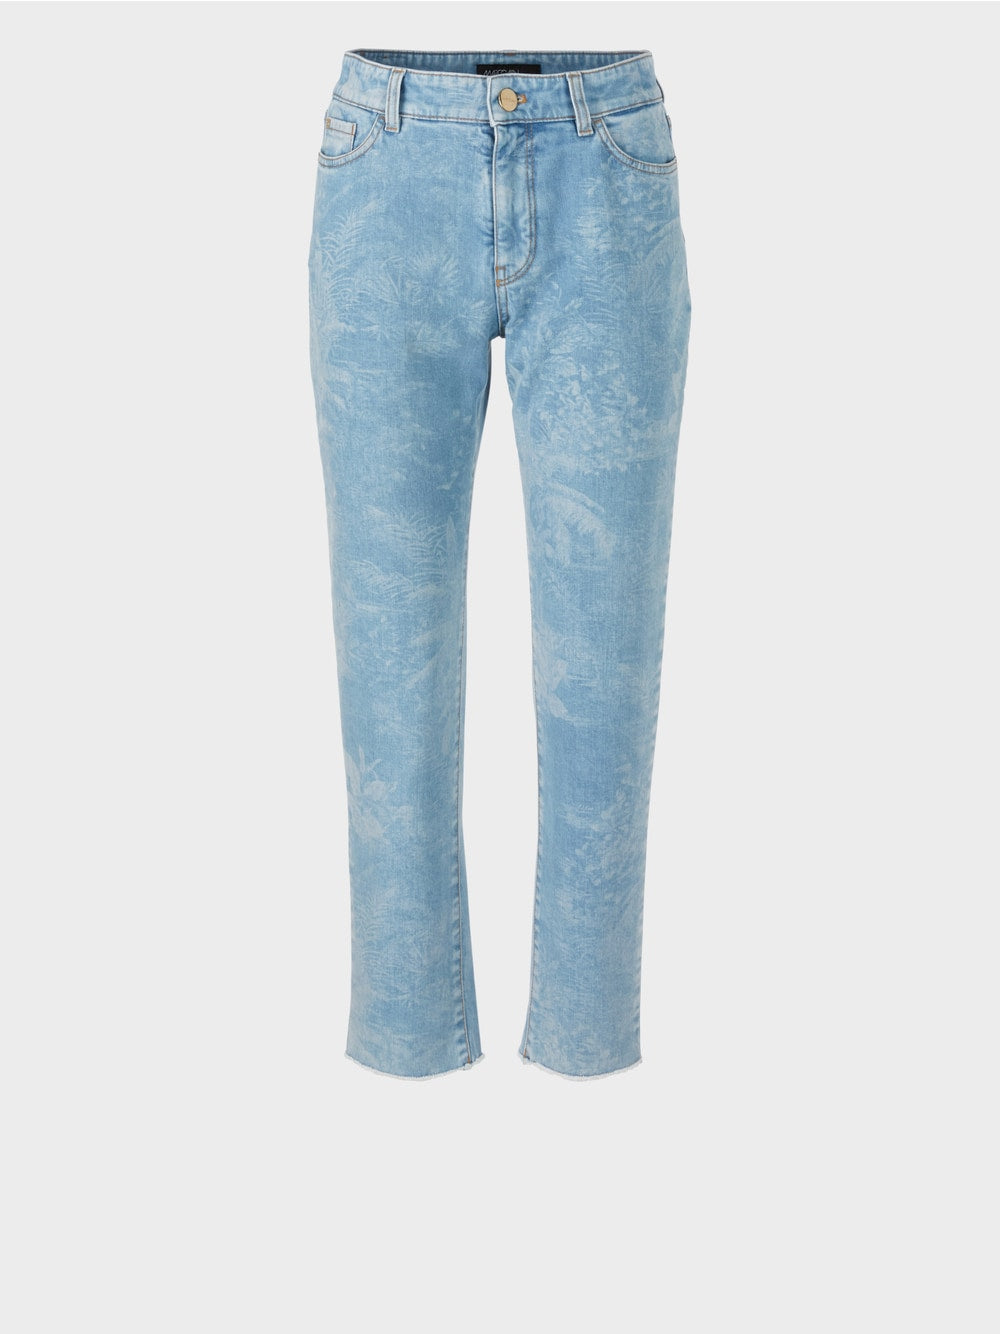 Marc Cain “Rethink Together” jeans with all over print